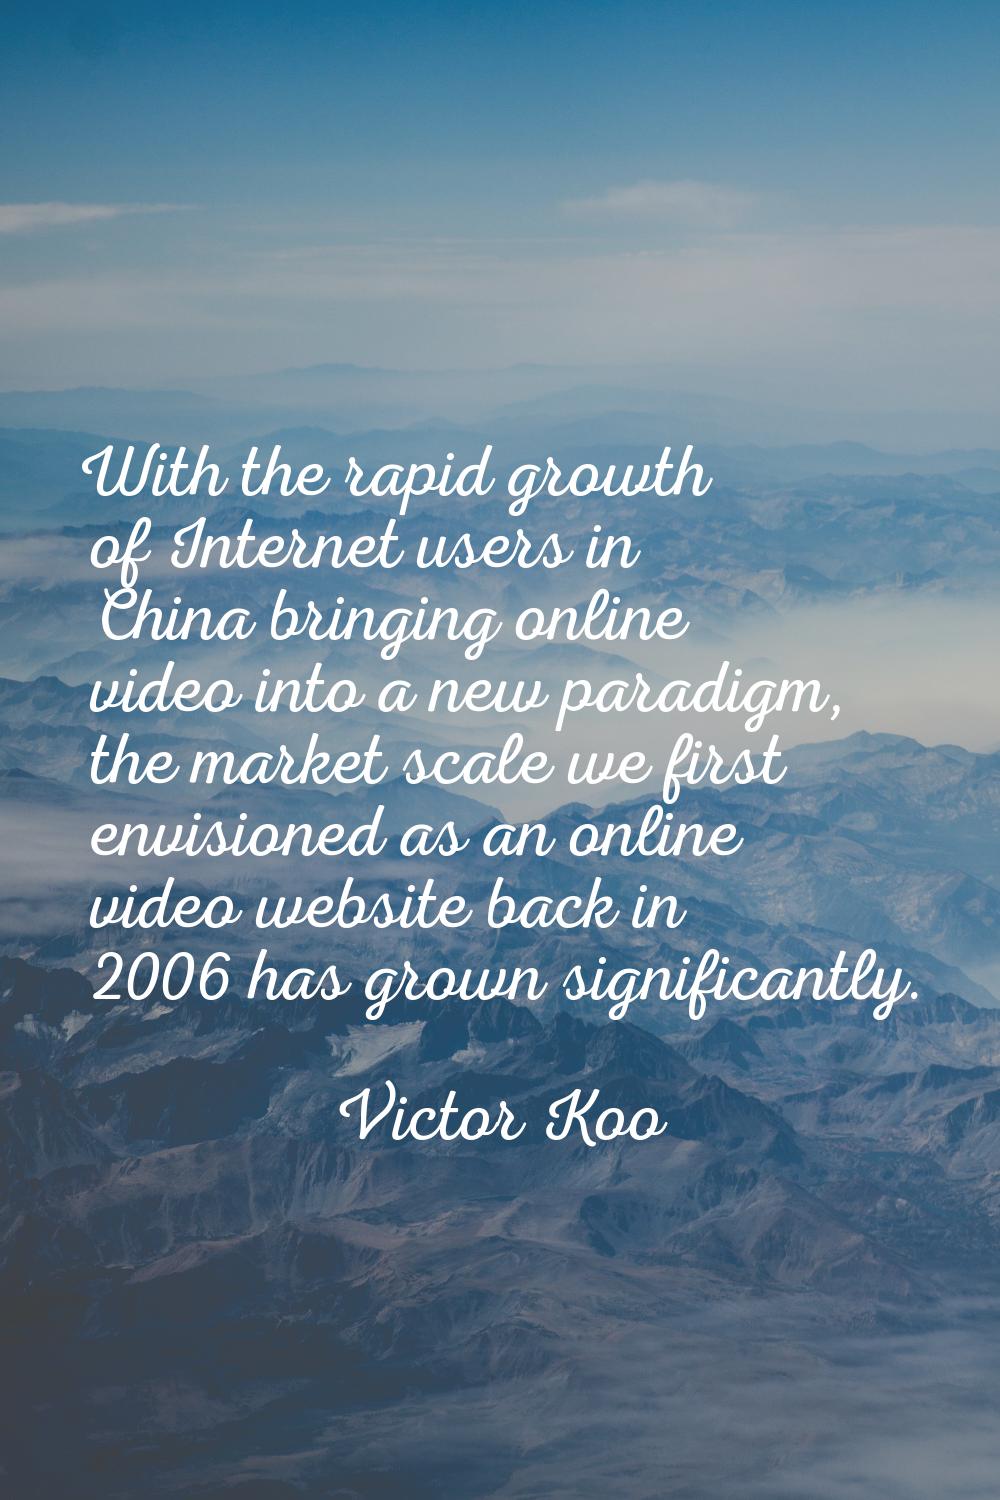 With the rapid growth of Internet users in China bringing online video into a new paradigm, the mar